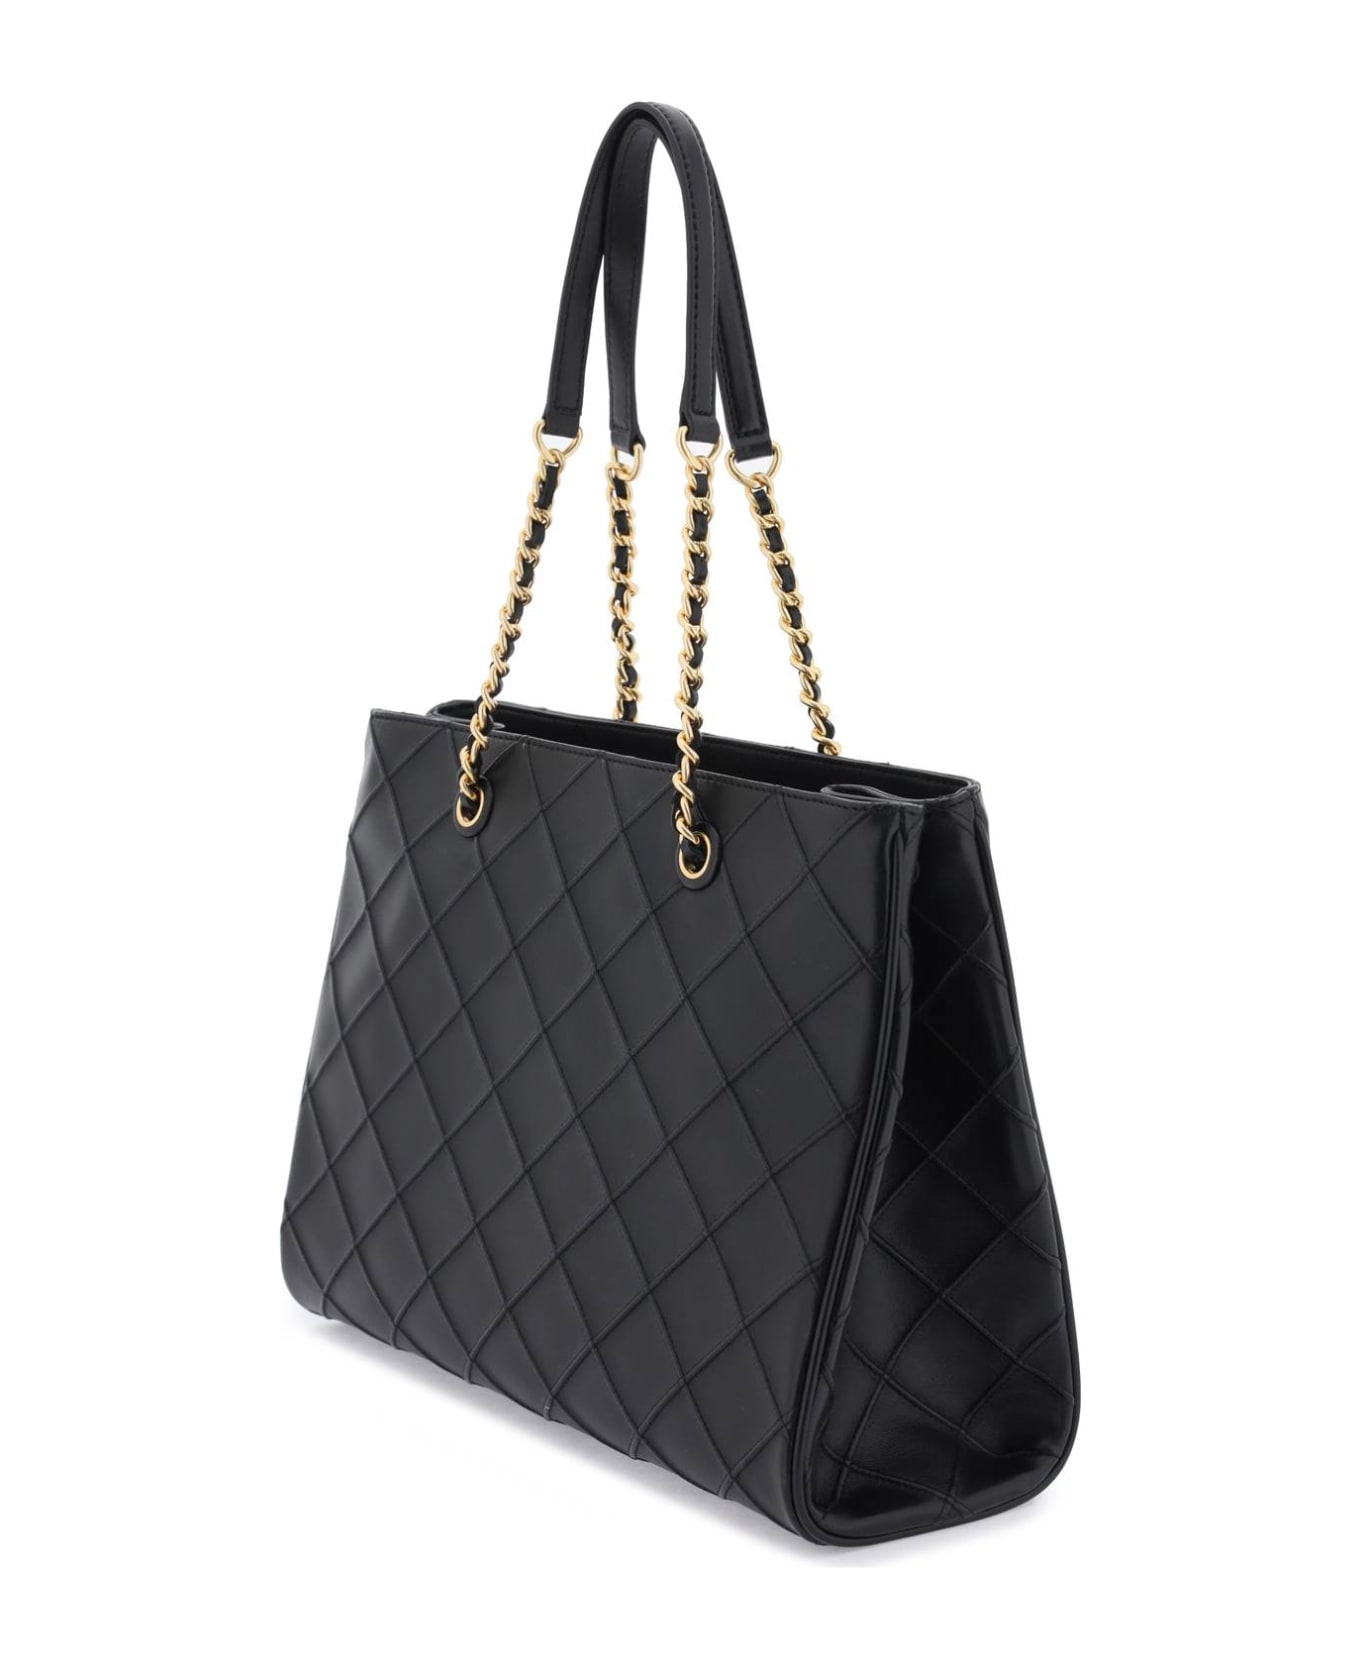 Tory Burch 'fleming Soft' Quilted Black Leather Bag - Black トートバッグ